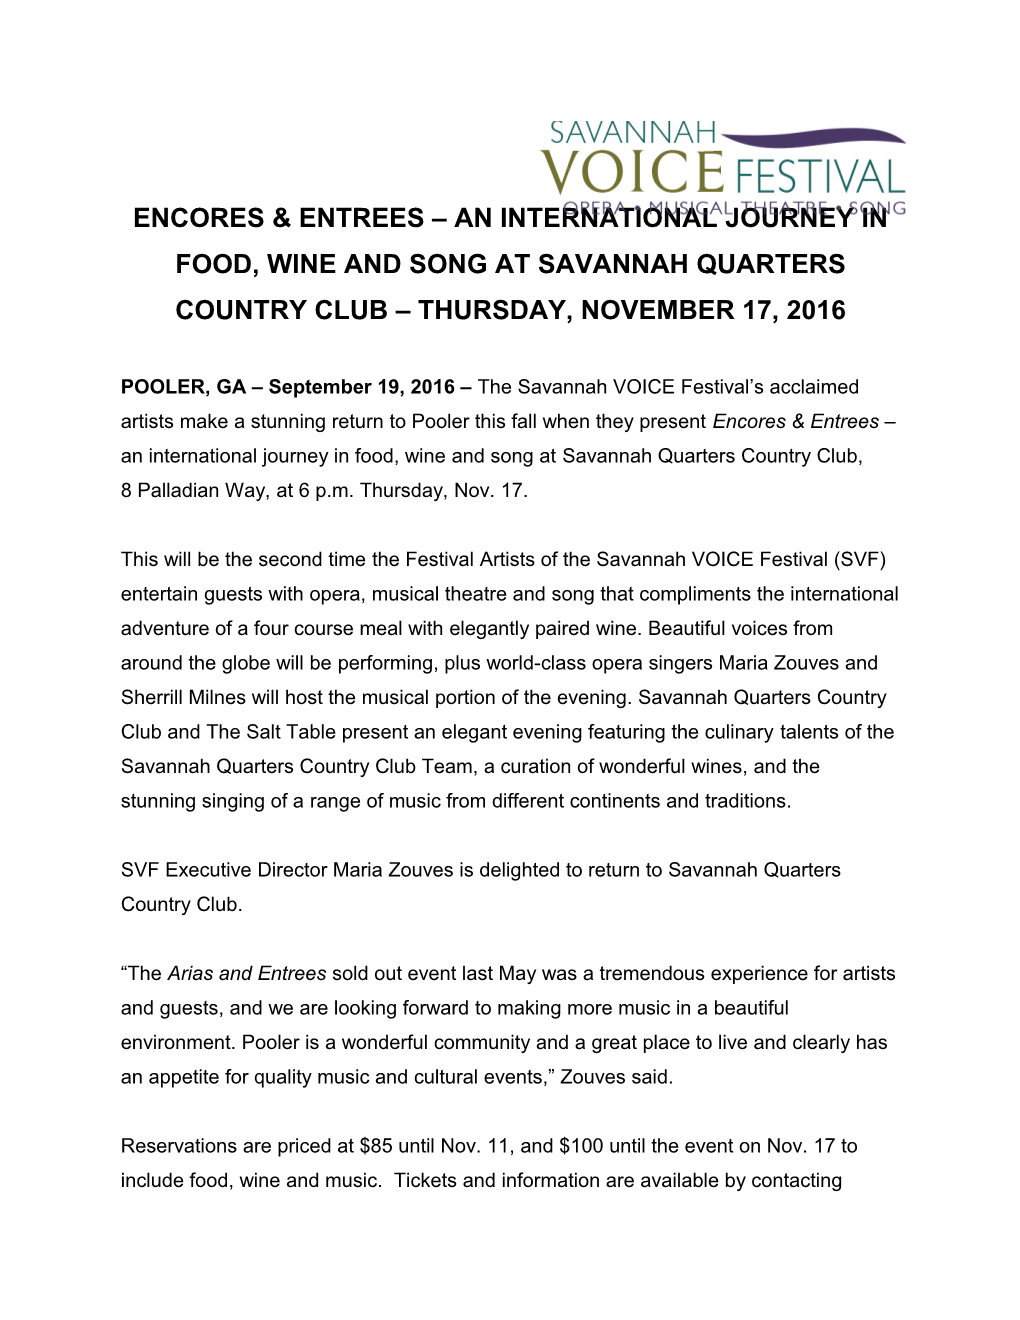 Encores & Entrees an International Journey in Food, Wine and Song at Savannah Quarters